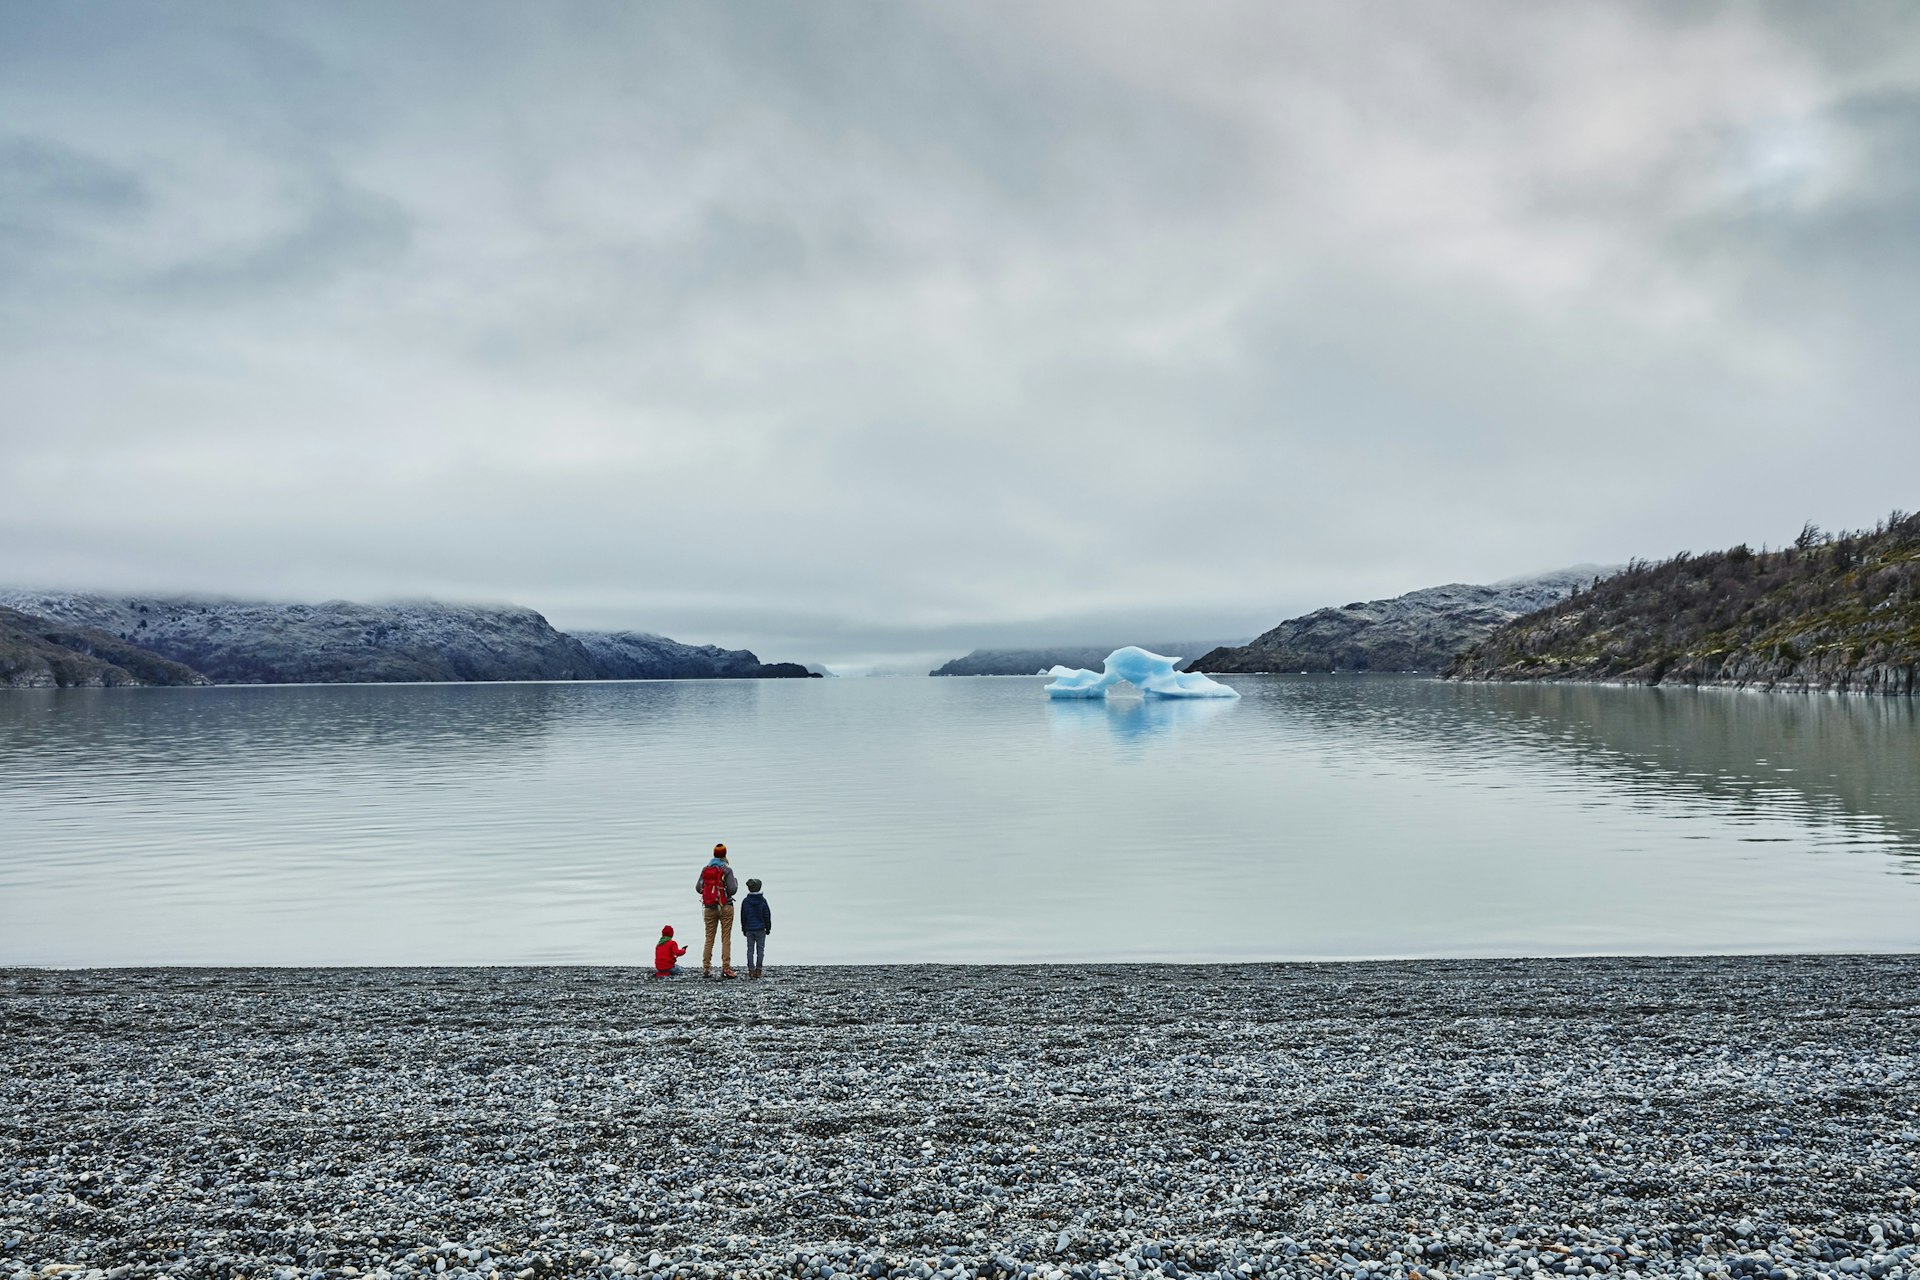 An adult stands with two young children at the edge of a lake looking out towards an iceberg